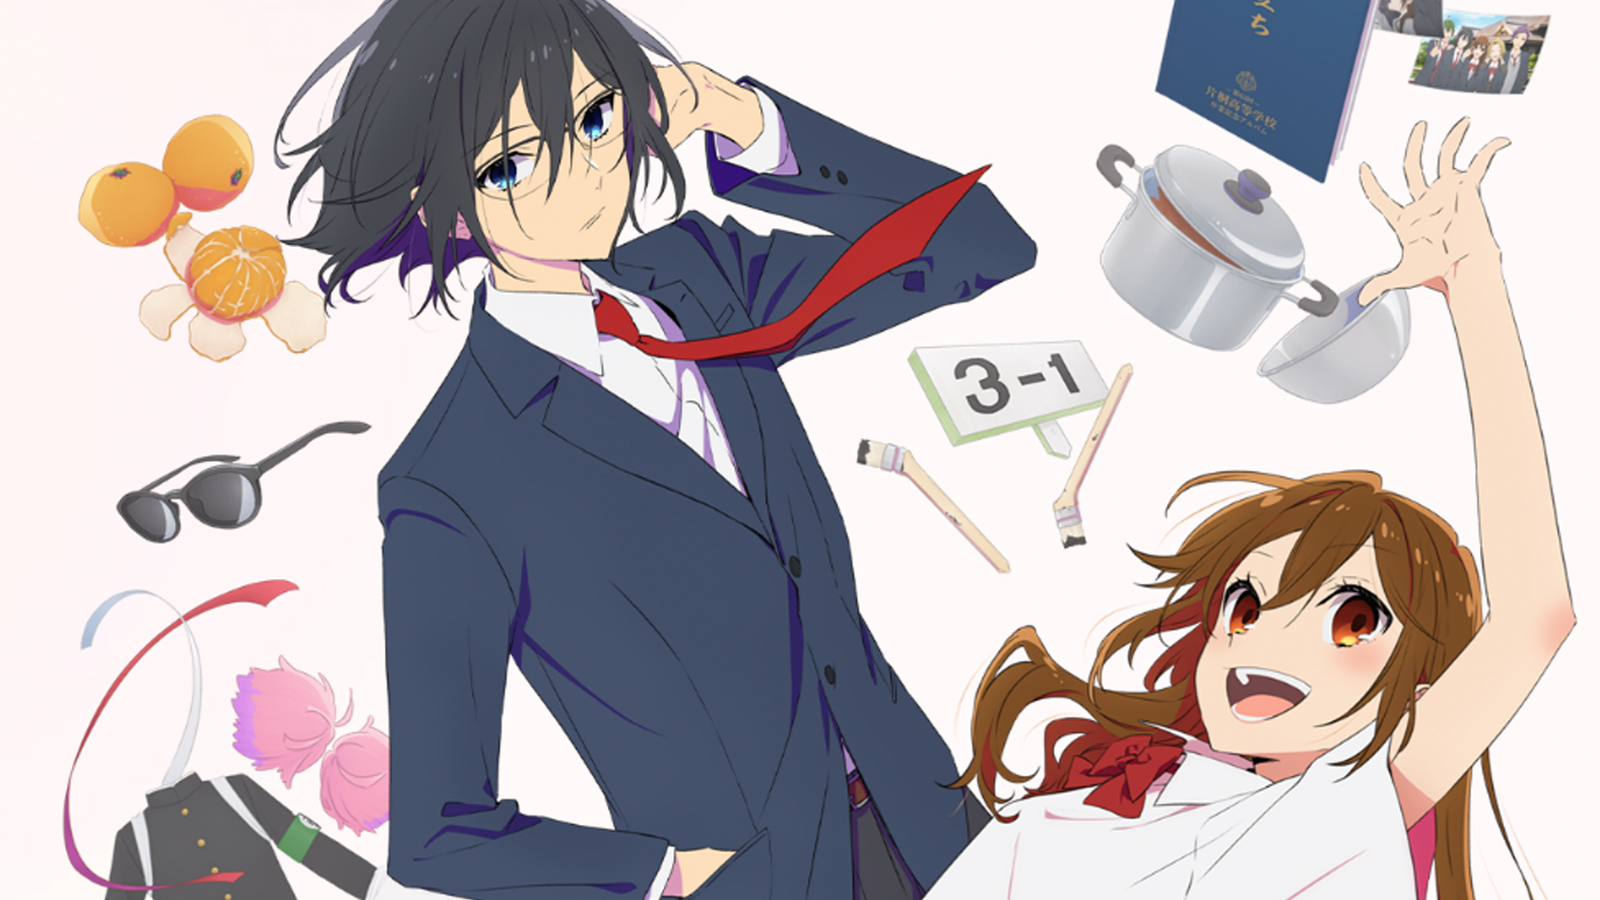 HORIMIYA SEASON 2 AND MUCH MORE ABOUT THIS ANIME - lavaindy